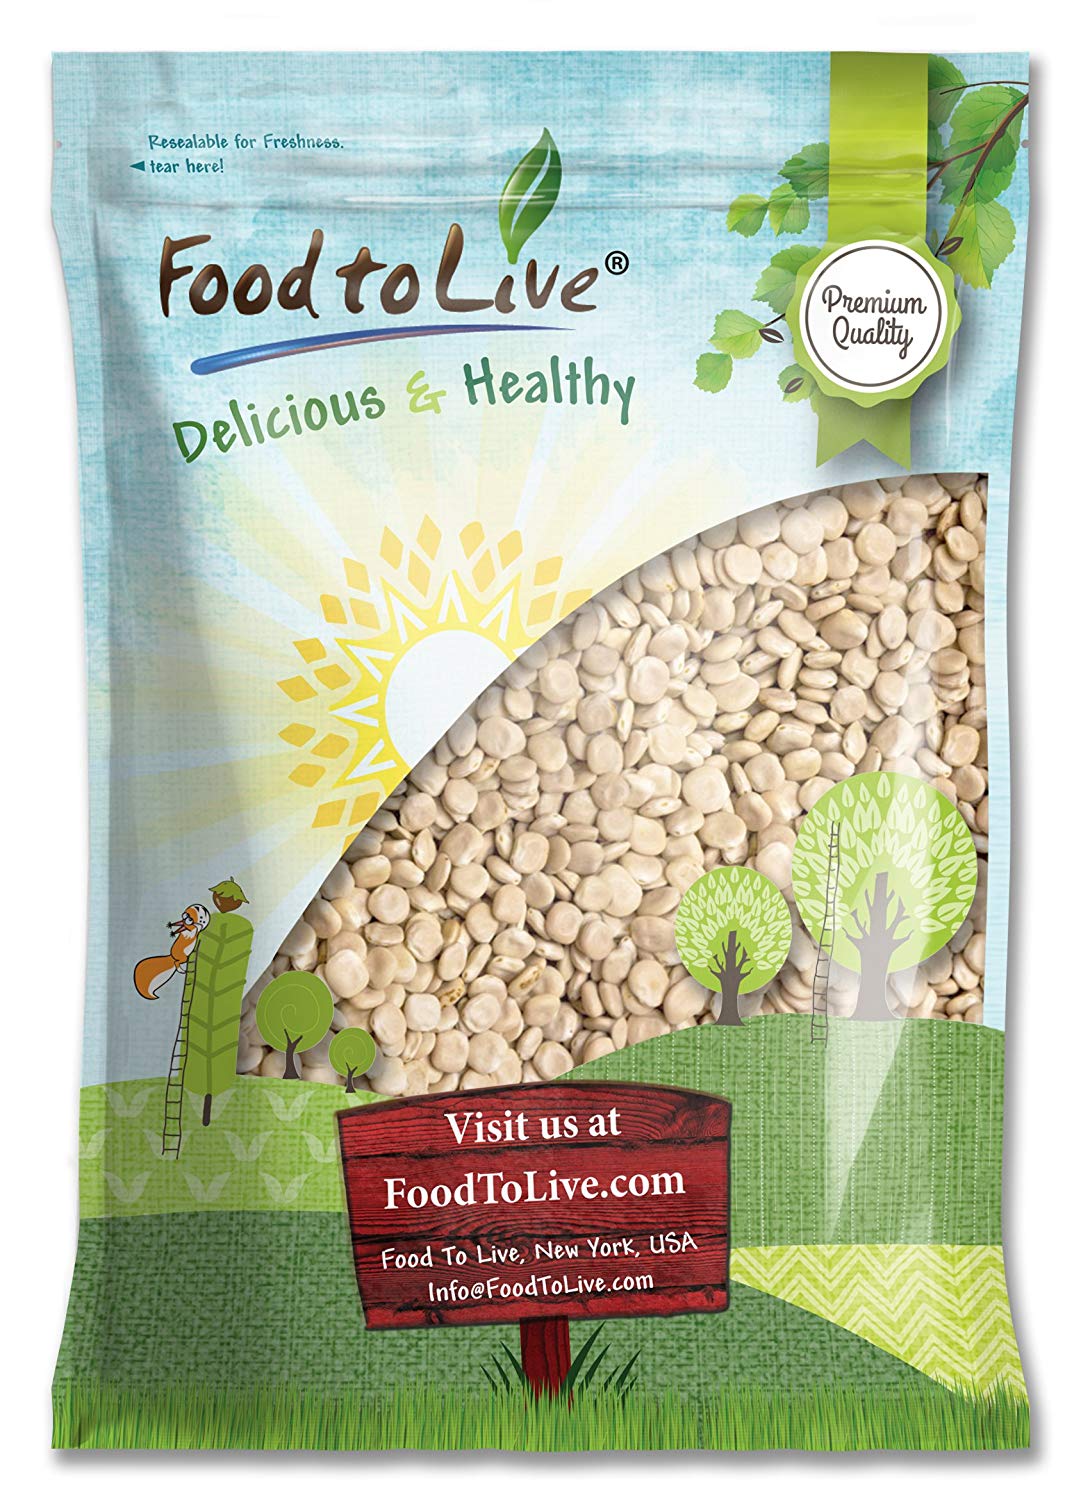 Lupini Beans - Kosher, Raw, Sproutable, Vegan - by Food to Live